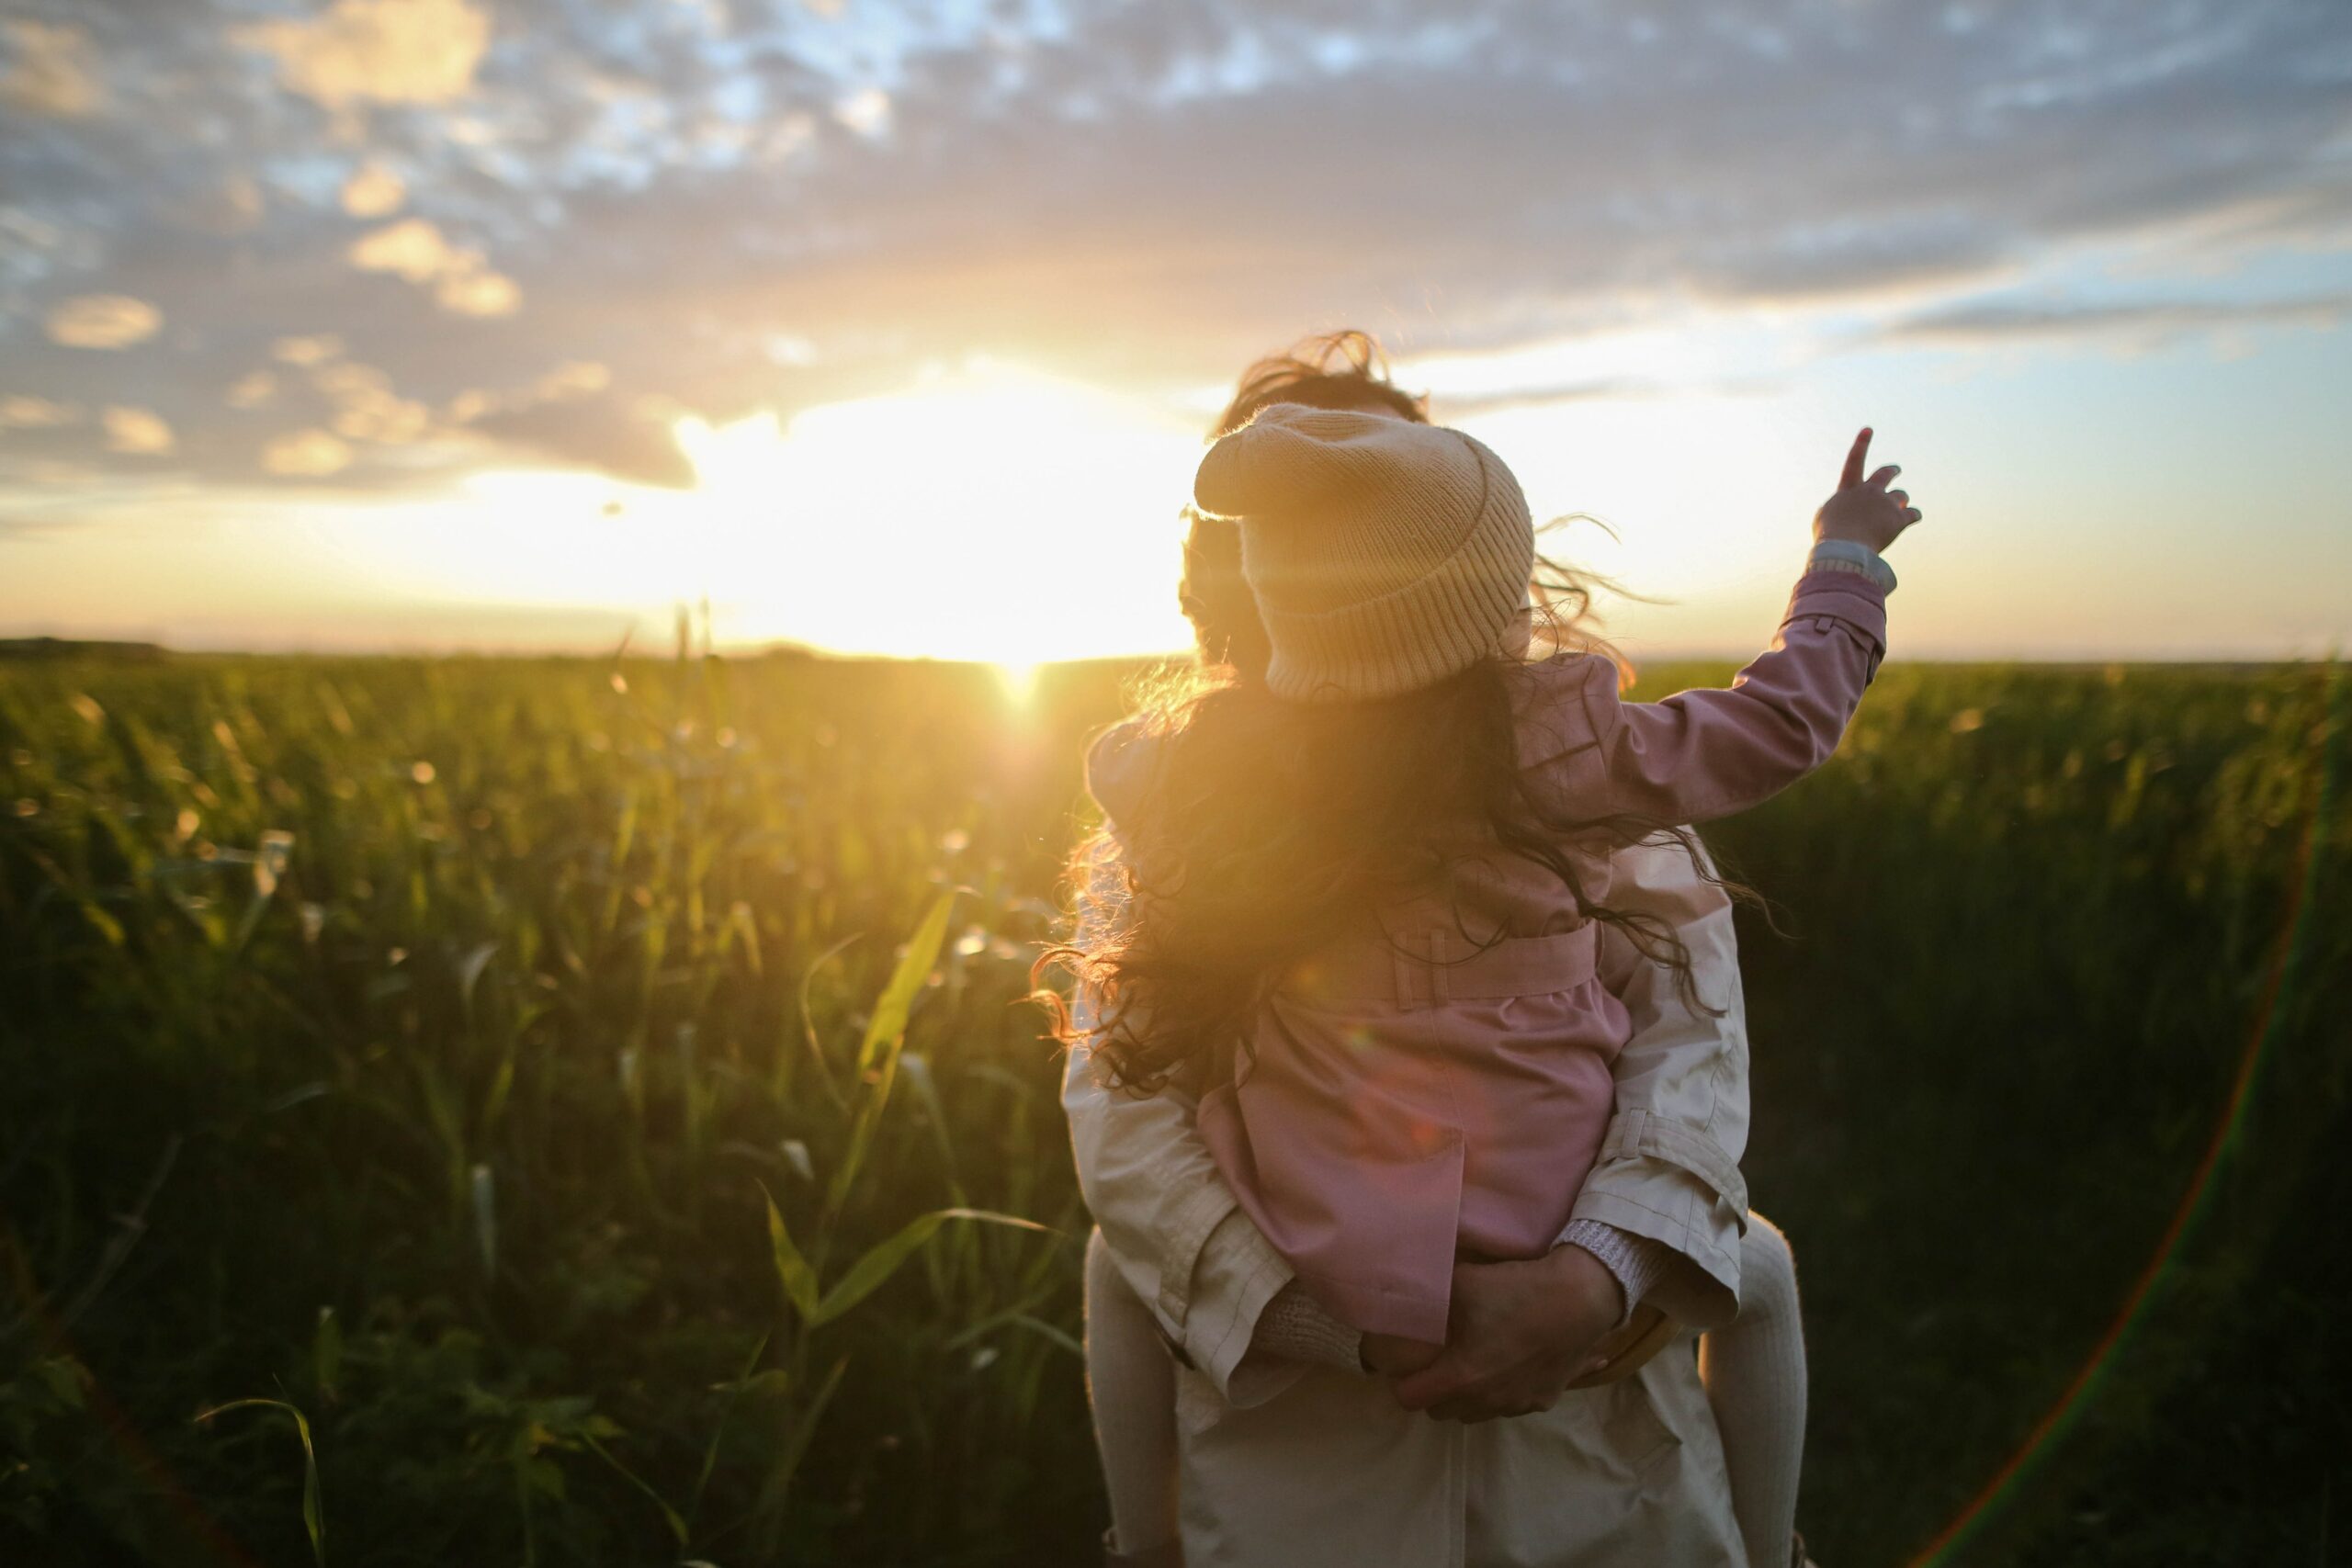 The image you described depicts a mother carrying her child in a field at sunset. The image symbolises a mother's love and care for her child and the beauty of nature during sunset. This image could represent a sustainable future where all individuals are treated with love and care and where nature is valued and protected. It can serve as a reminder of the importance of nurturing human relationships and preserving our environment for the well-being of future generations.